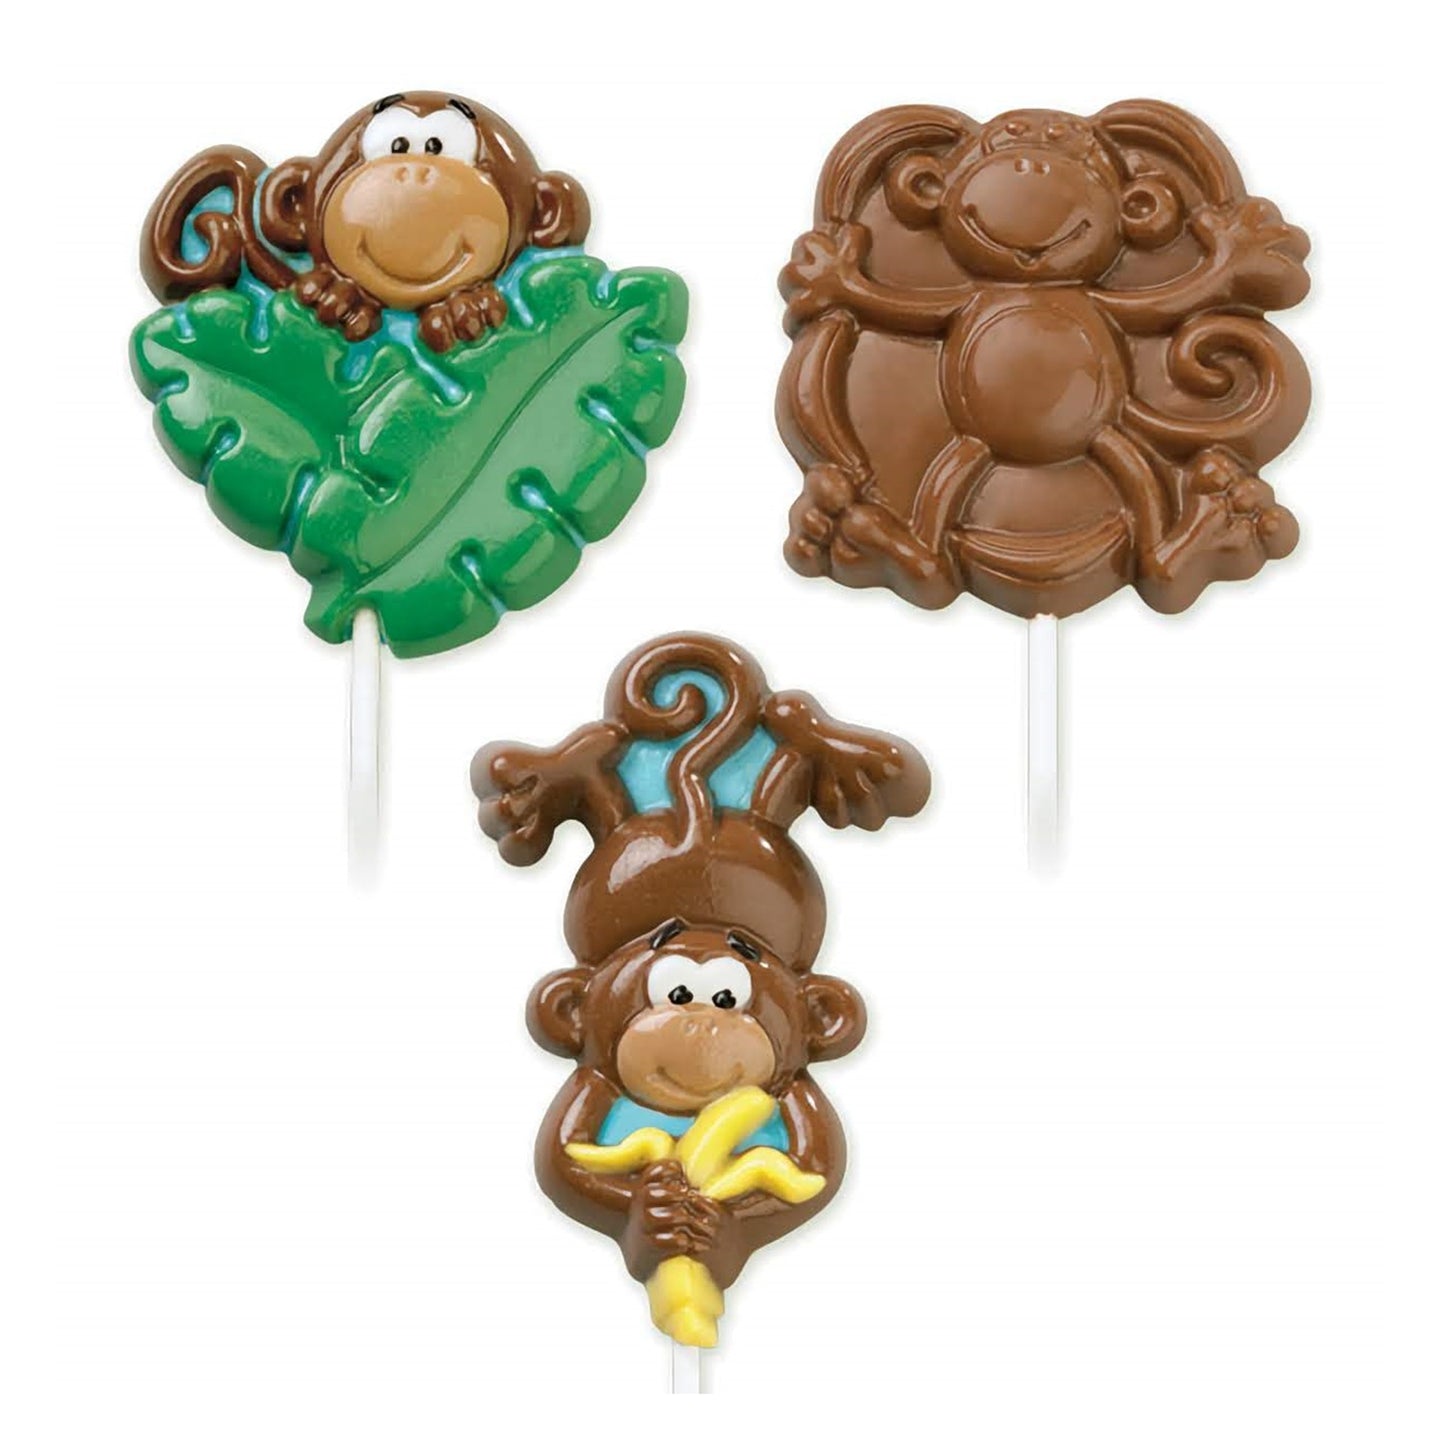 Fun monkey-shaped lollipop molds by Wilton, great for making jungle-themed treats or birthday party favors.